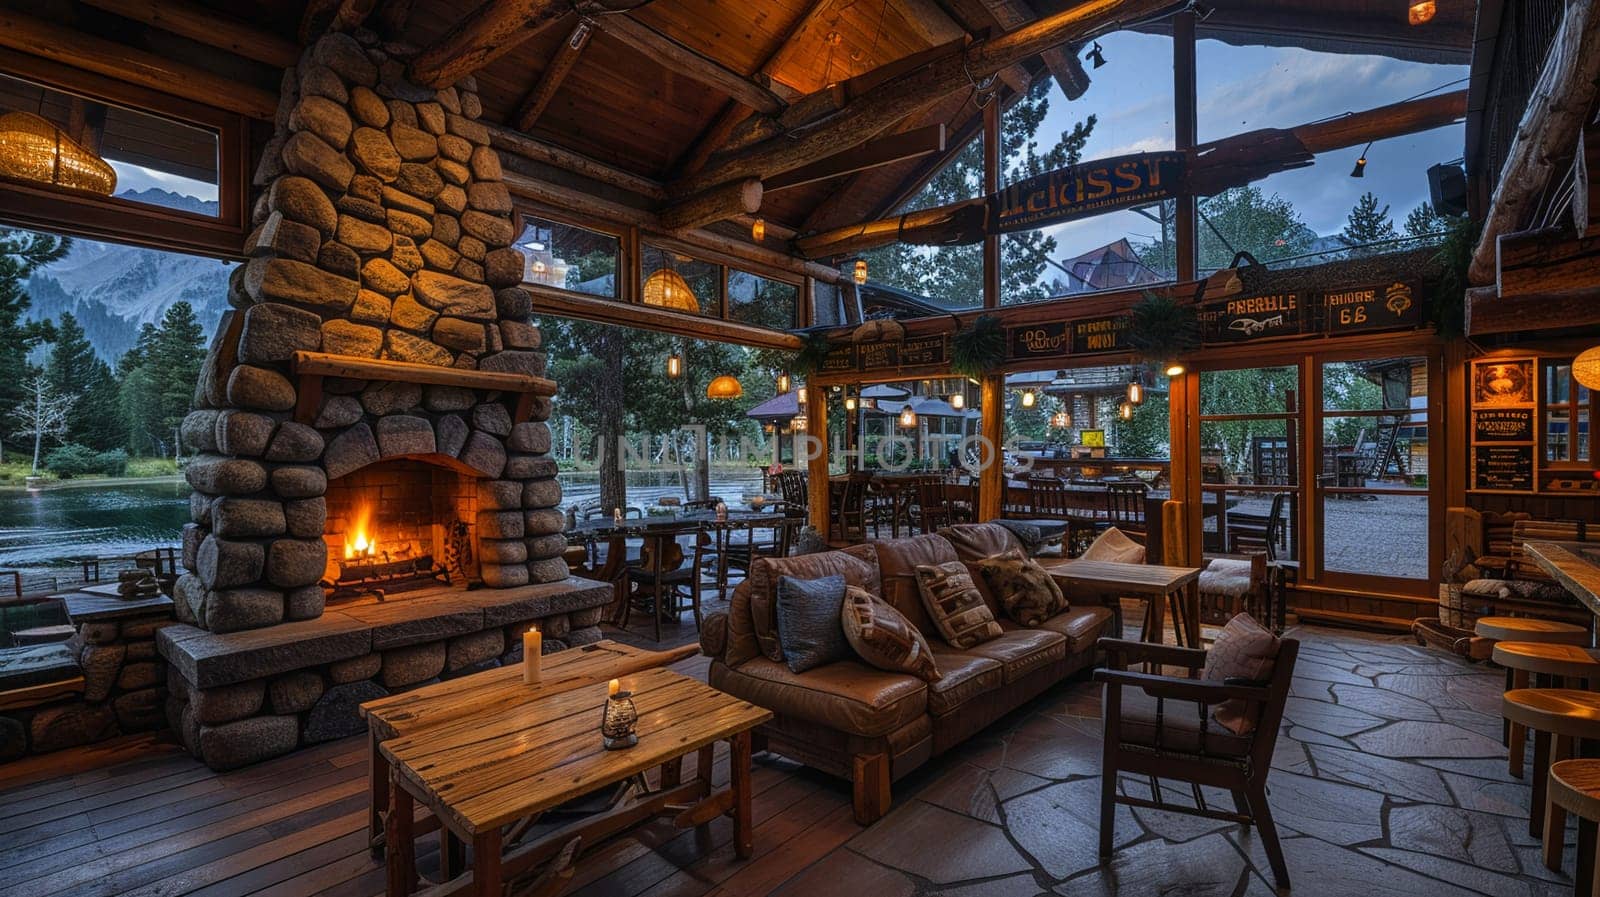 Rustic Lodge Offering Escape into Wilderness, wilderness lodge blending comfort with nature.